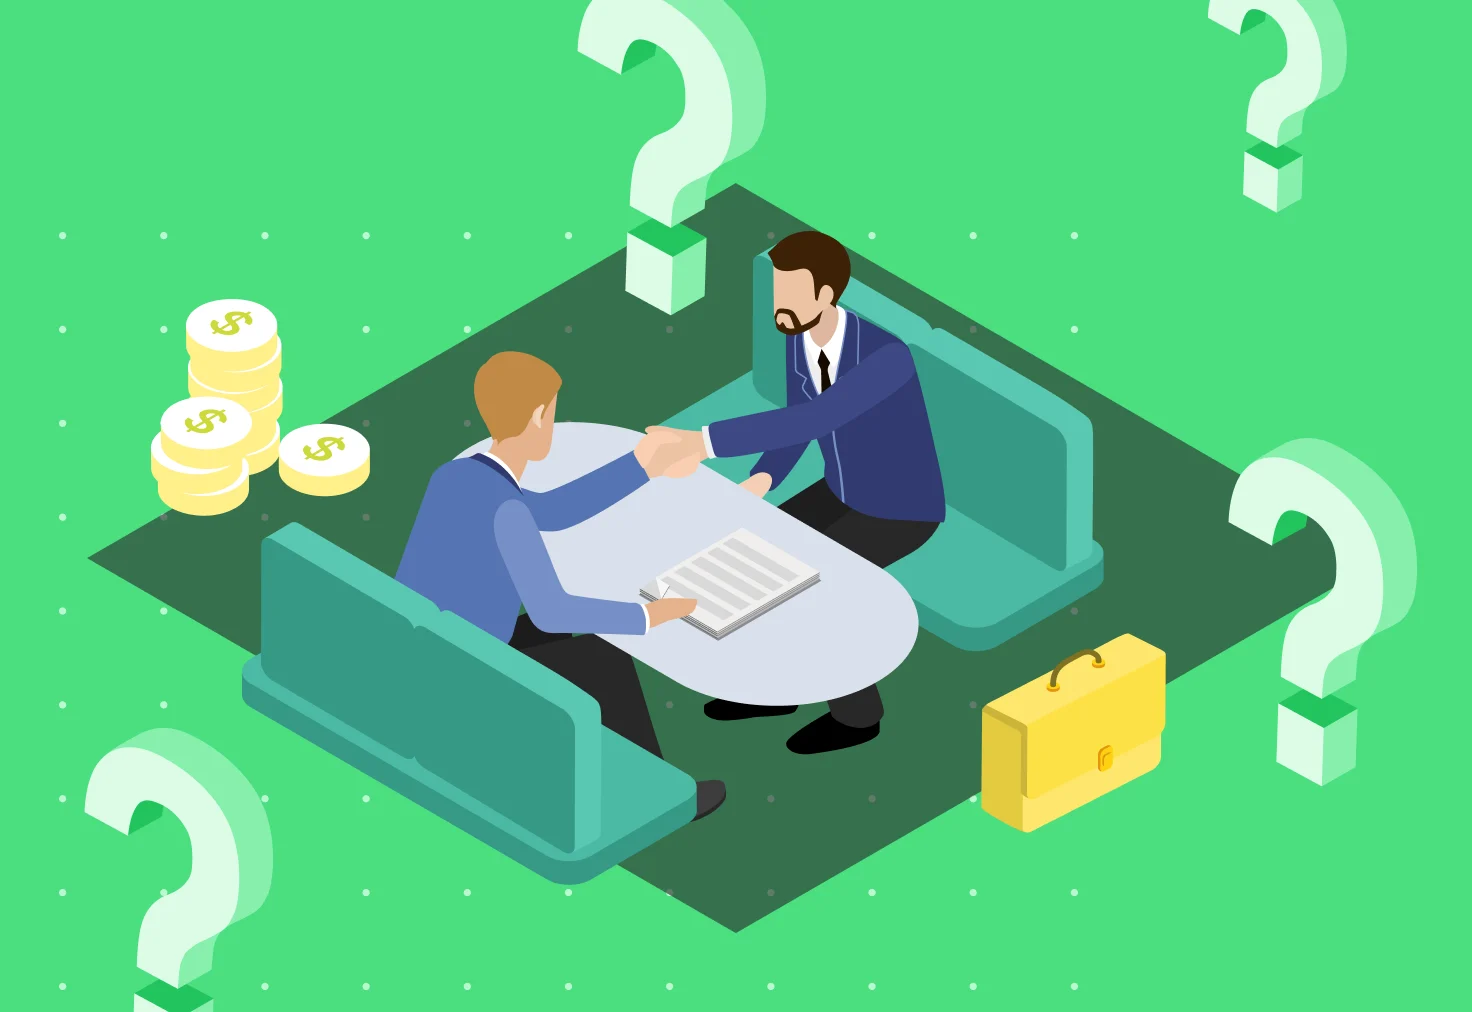 20 Interview Questions for Managers [w/ Tips & Sample Answers]